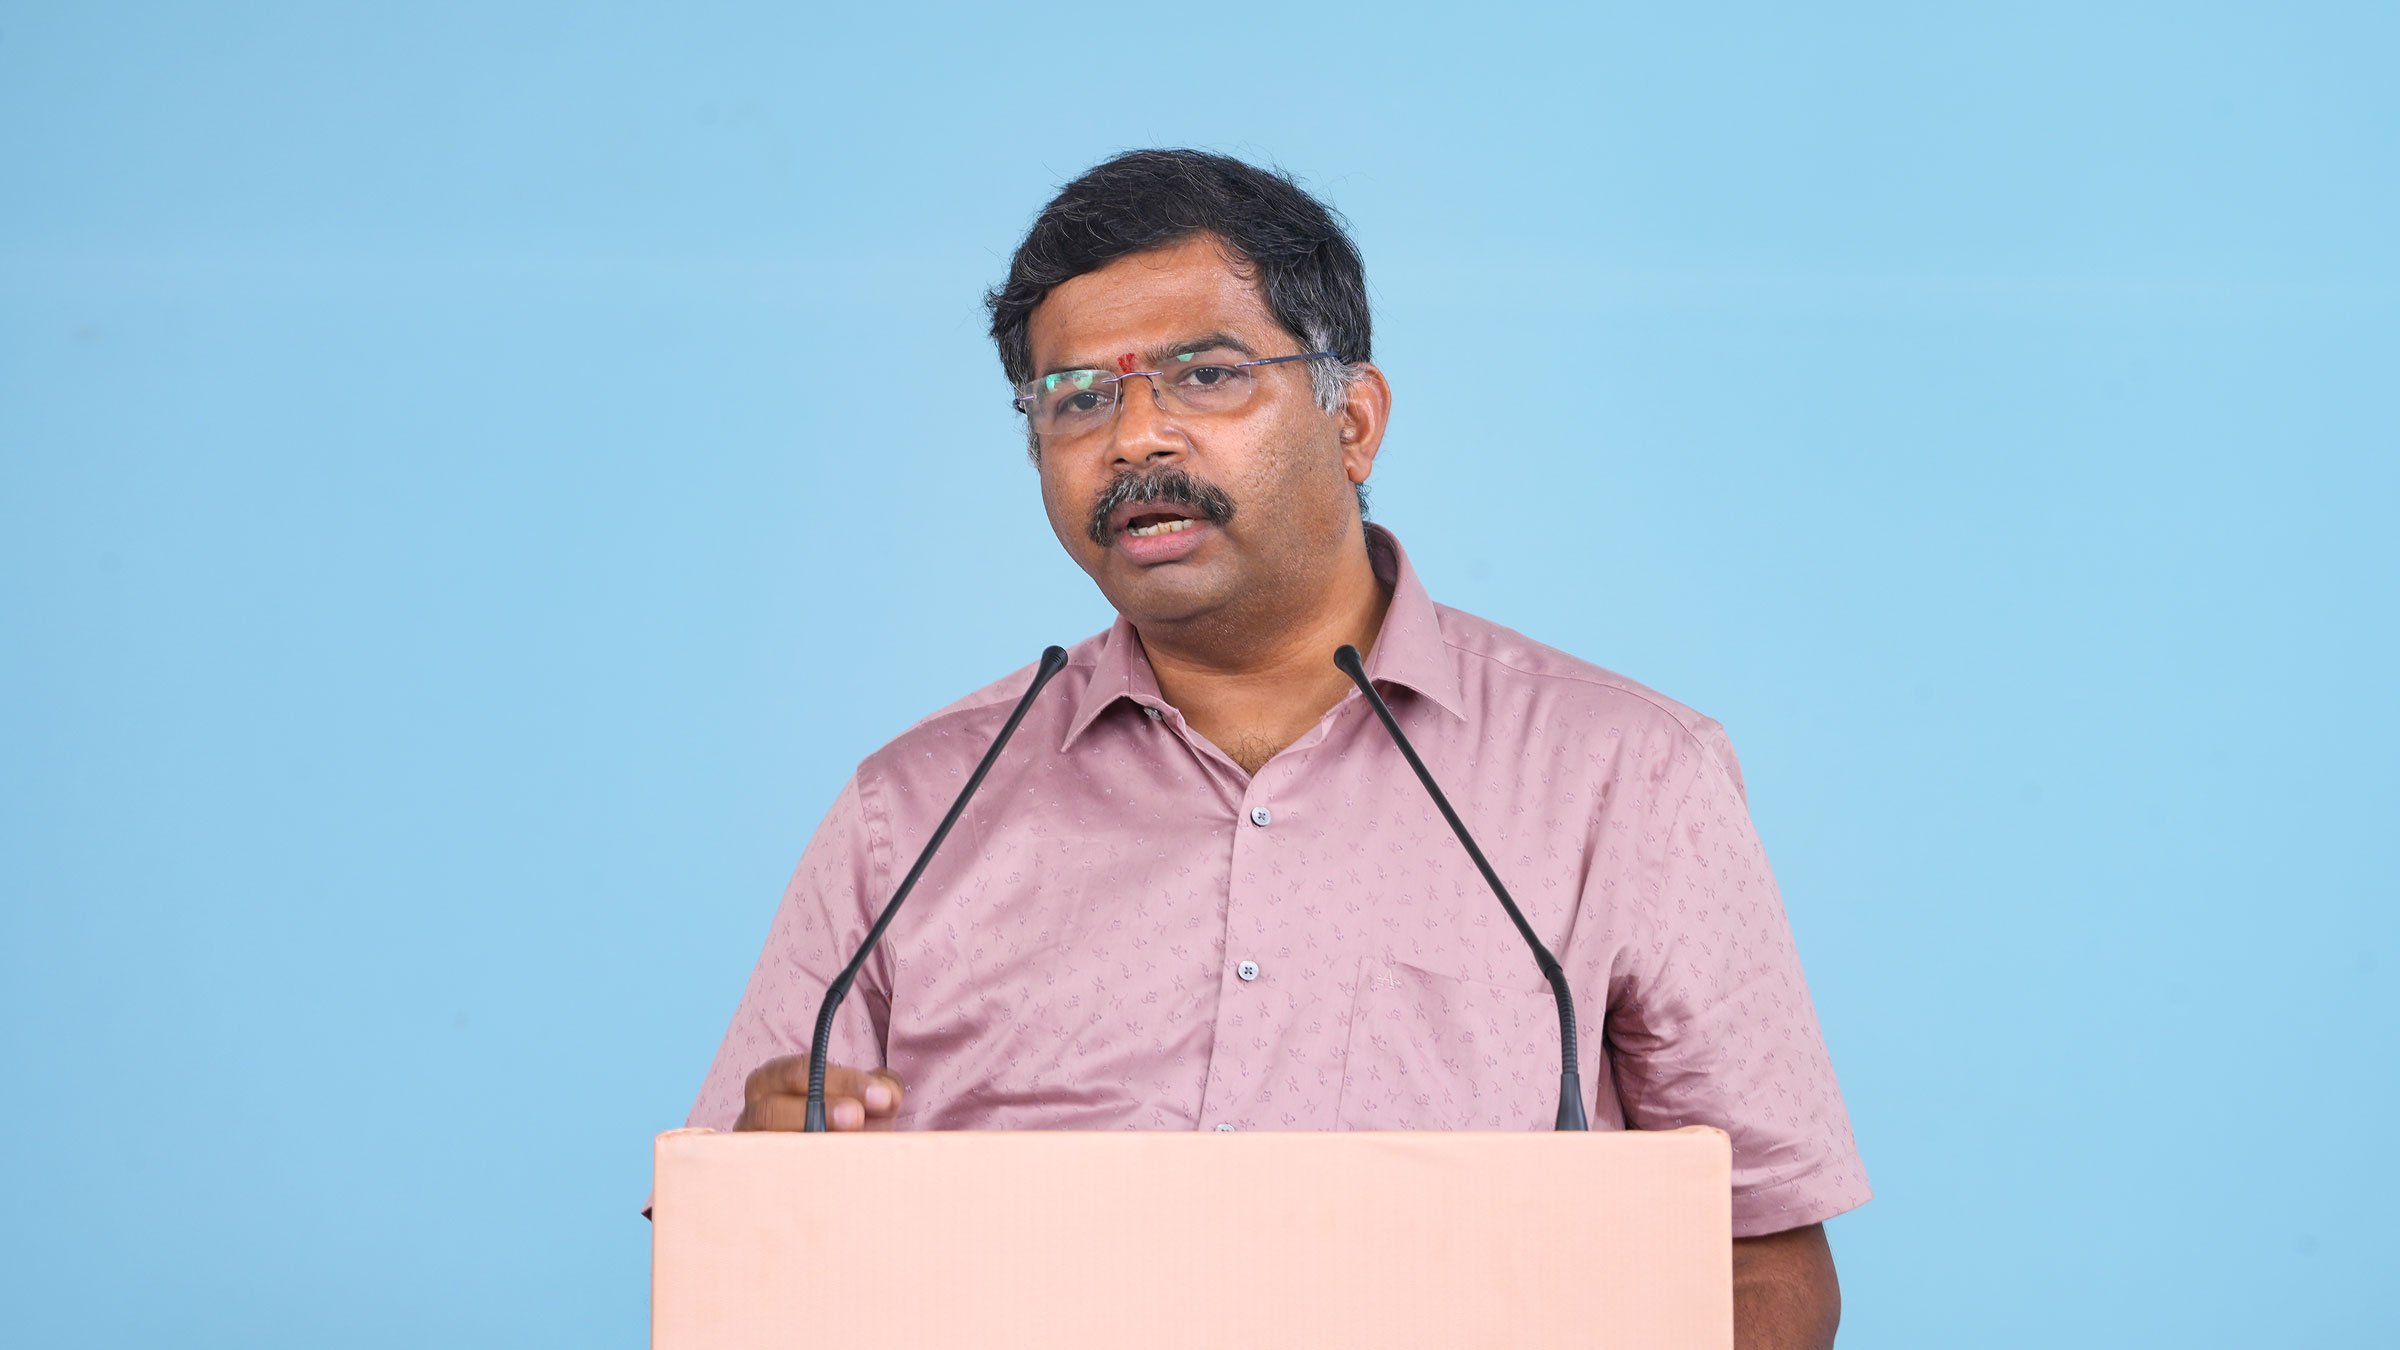 Study Hindu Scriptures to repel the intellectual attacks (such as permission for same-sex marriages) taking place on Hindu culture. - Adv. Sridhar Potaraju (Supreme Court of India, Delhi)